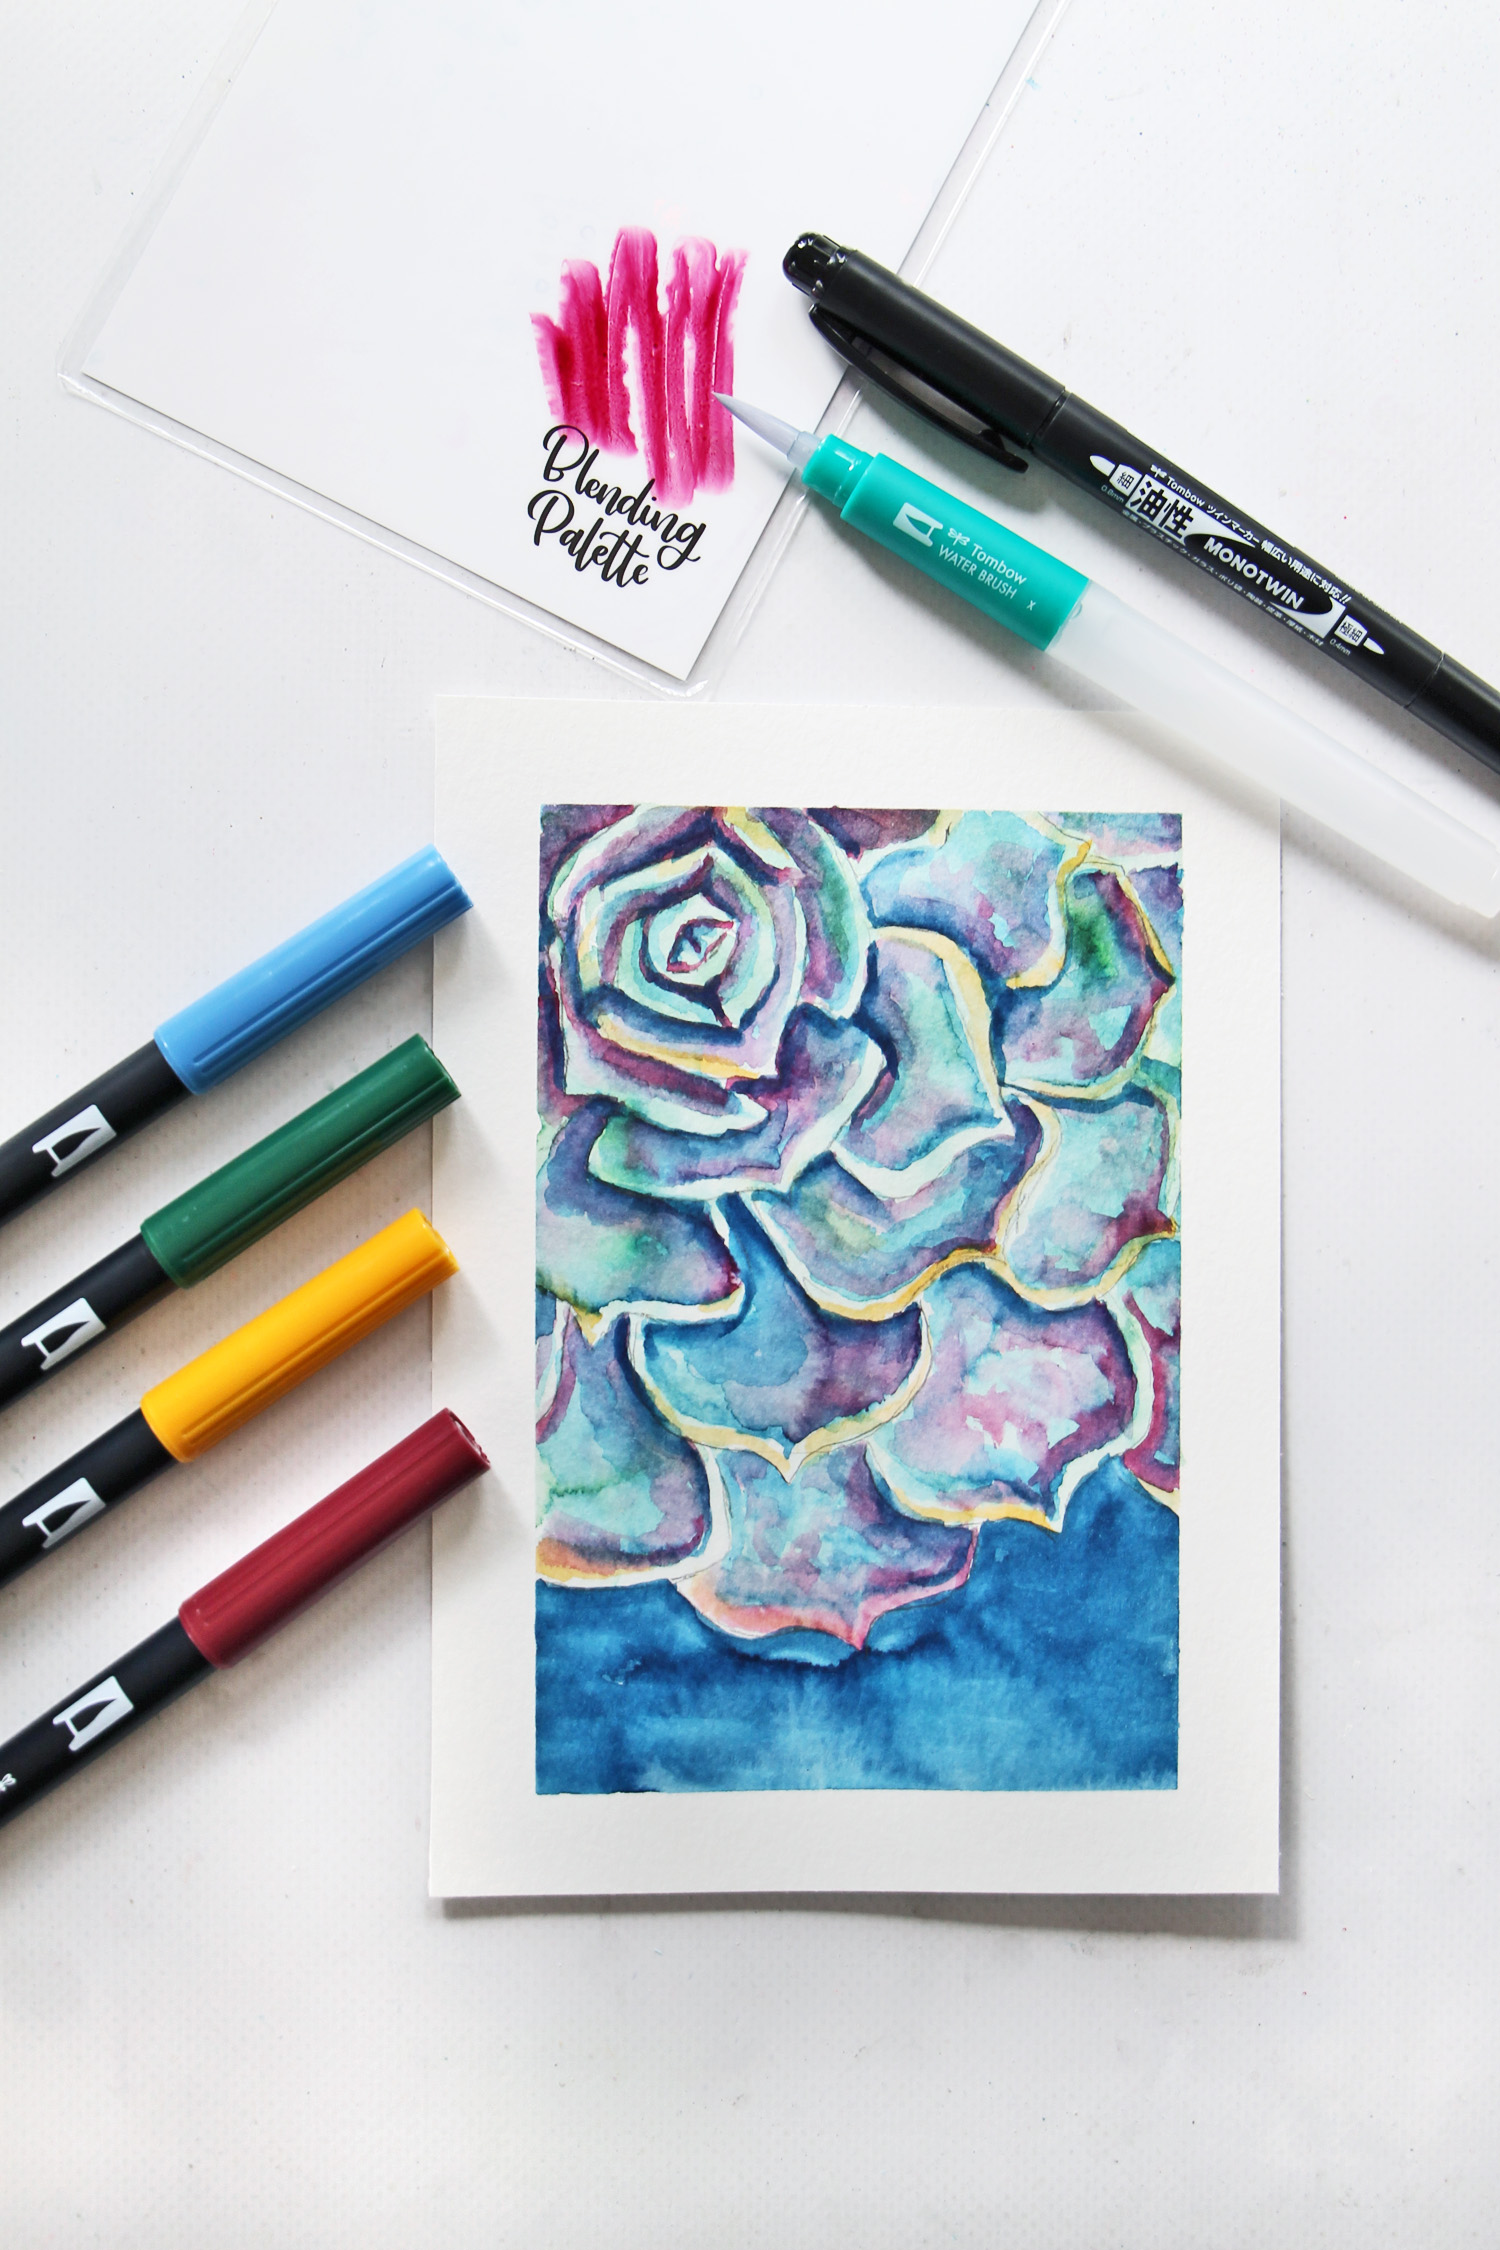 Learn how to paint a watercolor succulent using Tombow's Watercolor Set and this tutorial by @studiokatie #tombowusa #ombow #watercolor